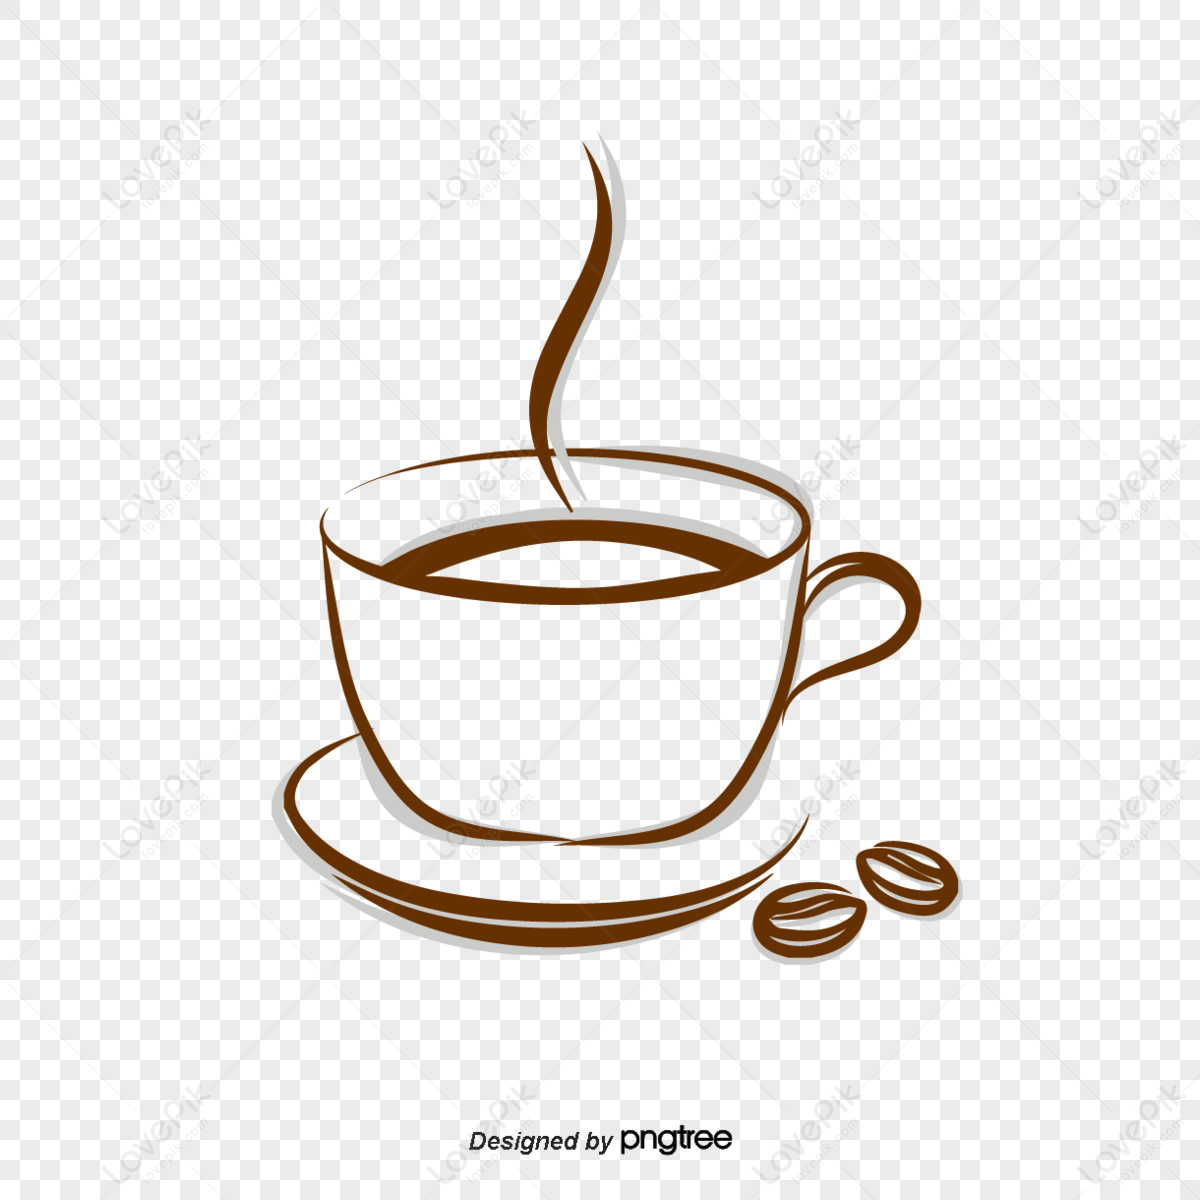 Coffee - Black and white drawing of coffee cup - CleanPNG / KissPNG